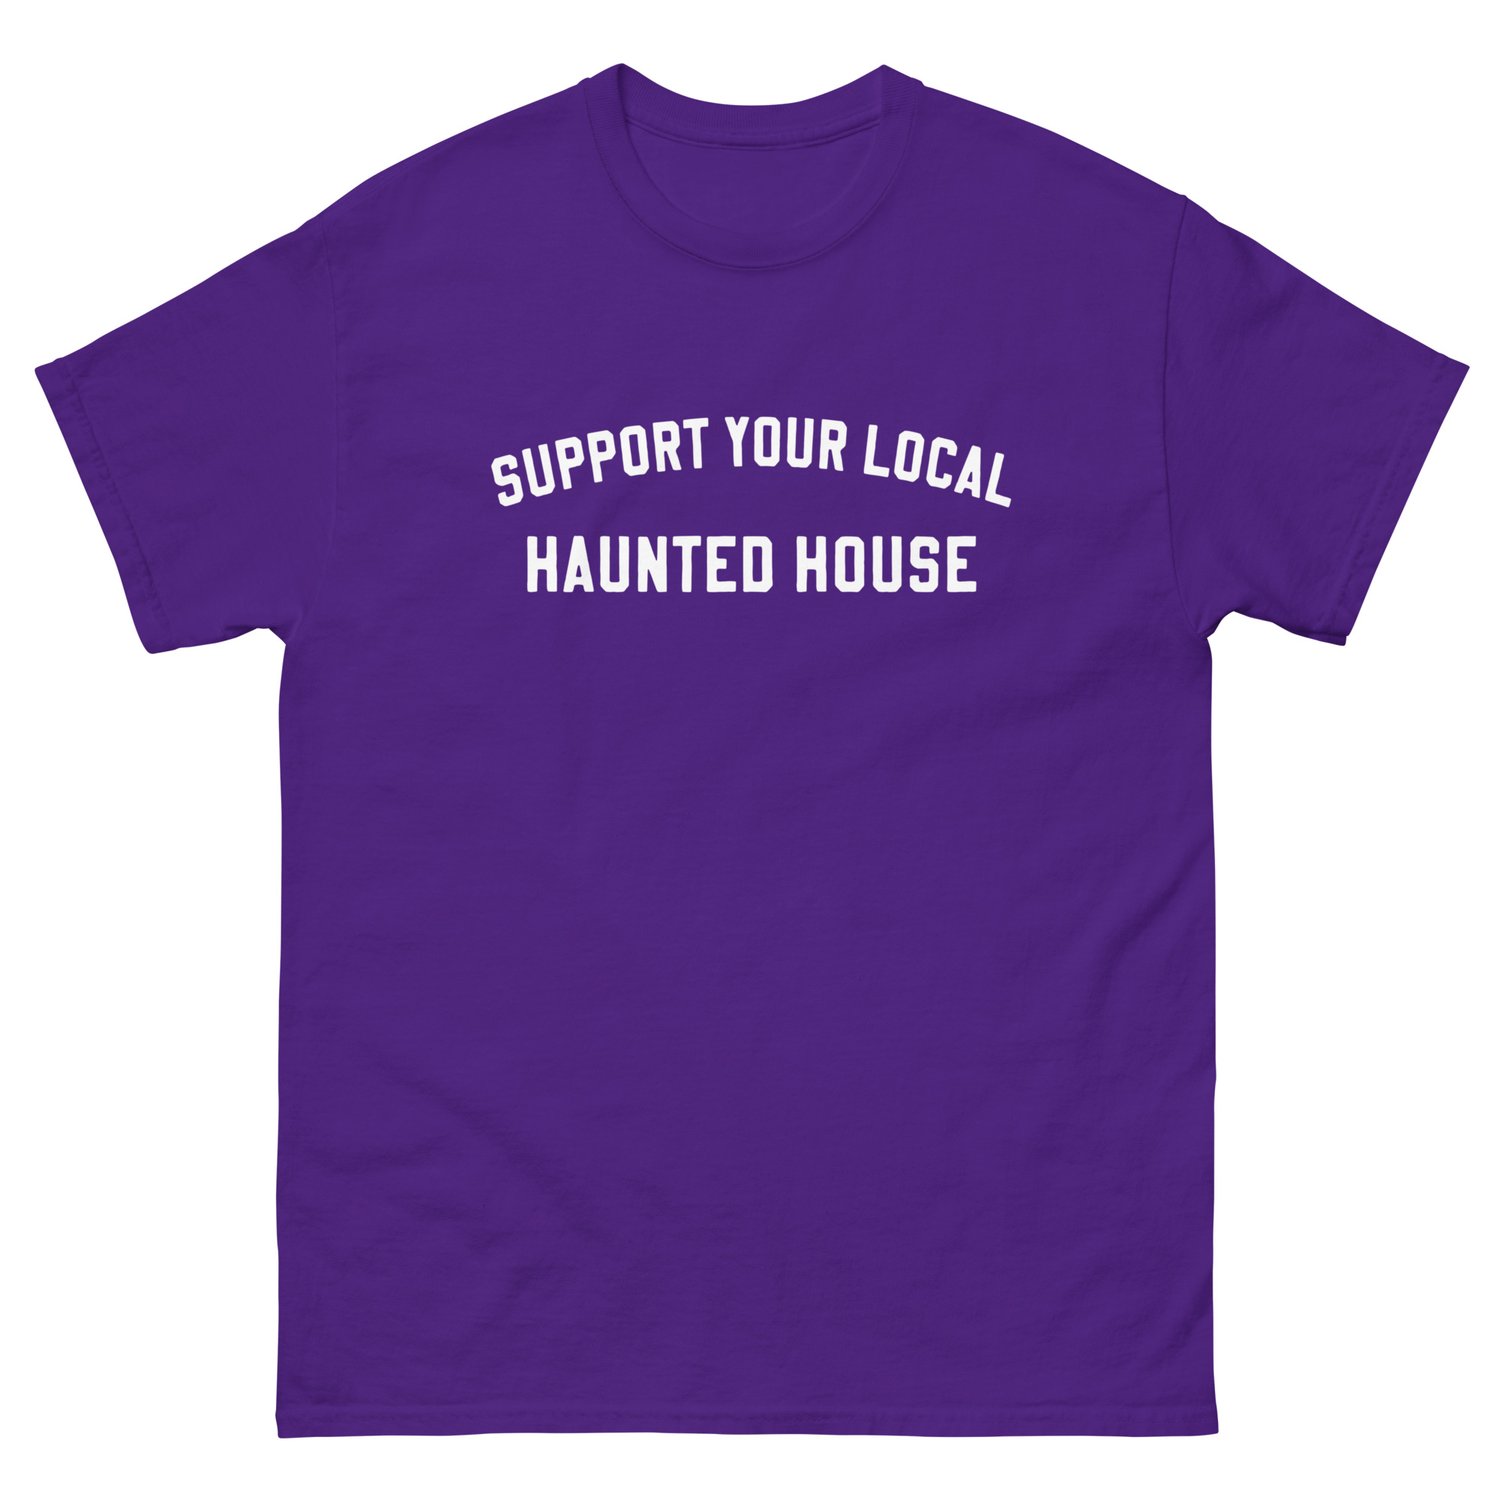 Image of Support Your Local Haunted House tee